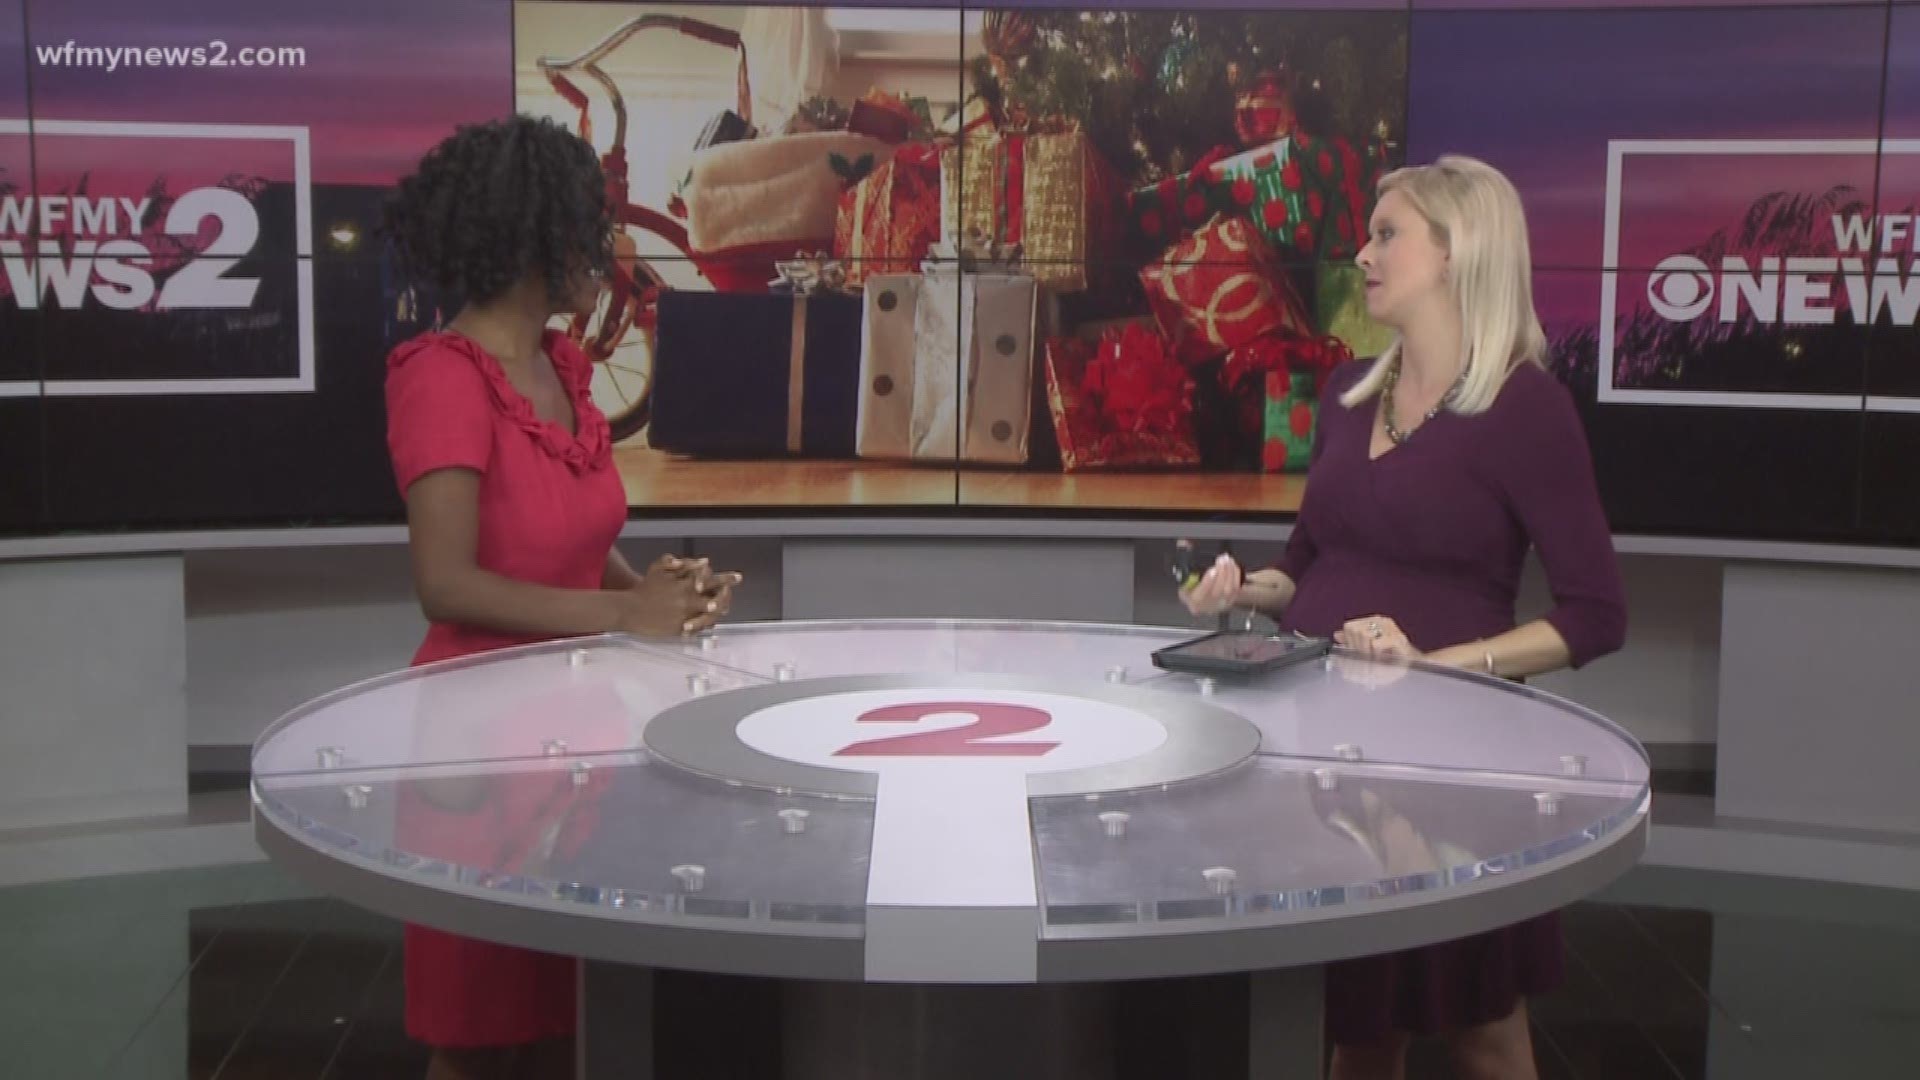 Debt expert Ja’Net Adams says it’s time to pull the plug on exchanging Christmas gifts with adult family members and friends.